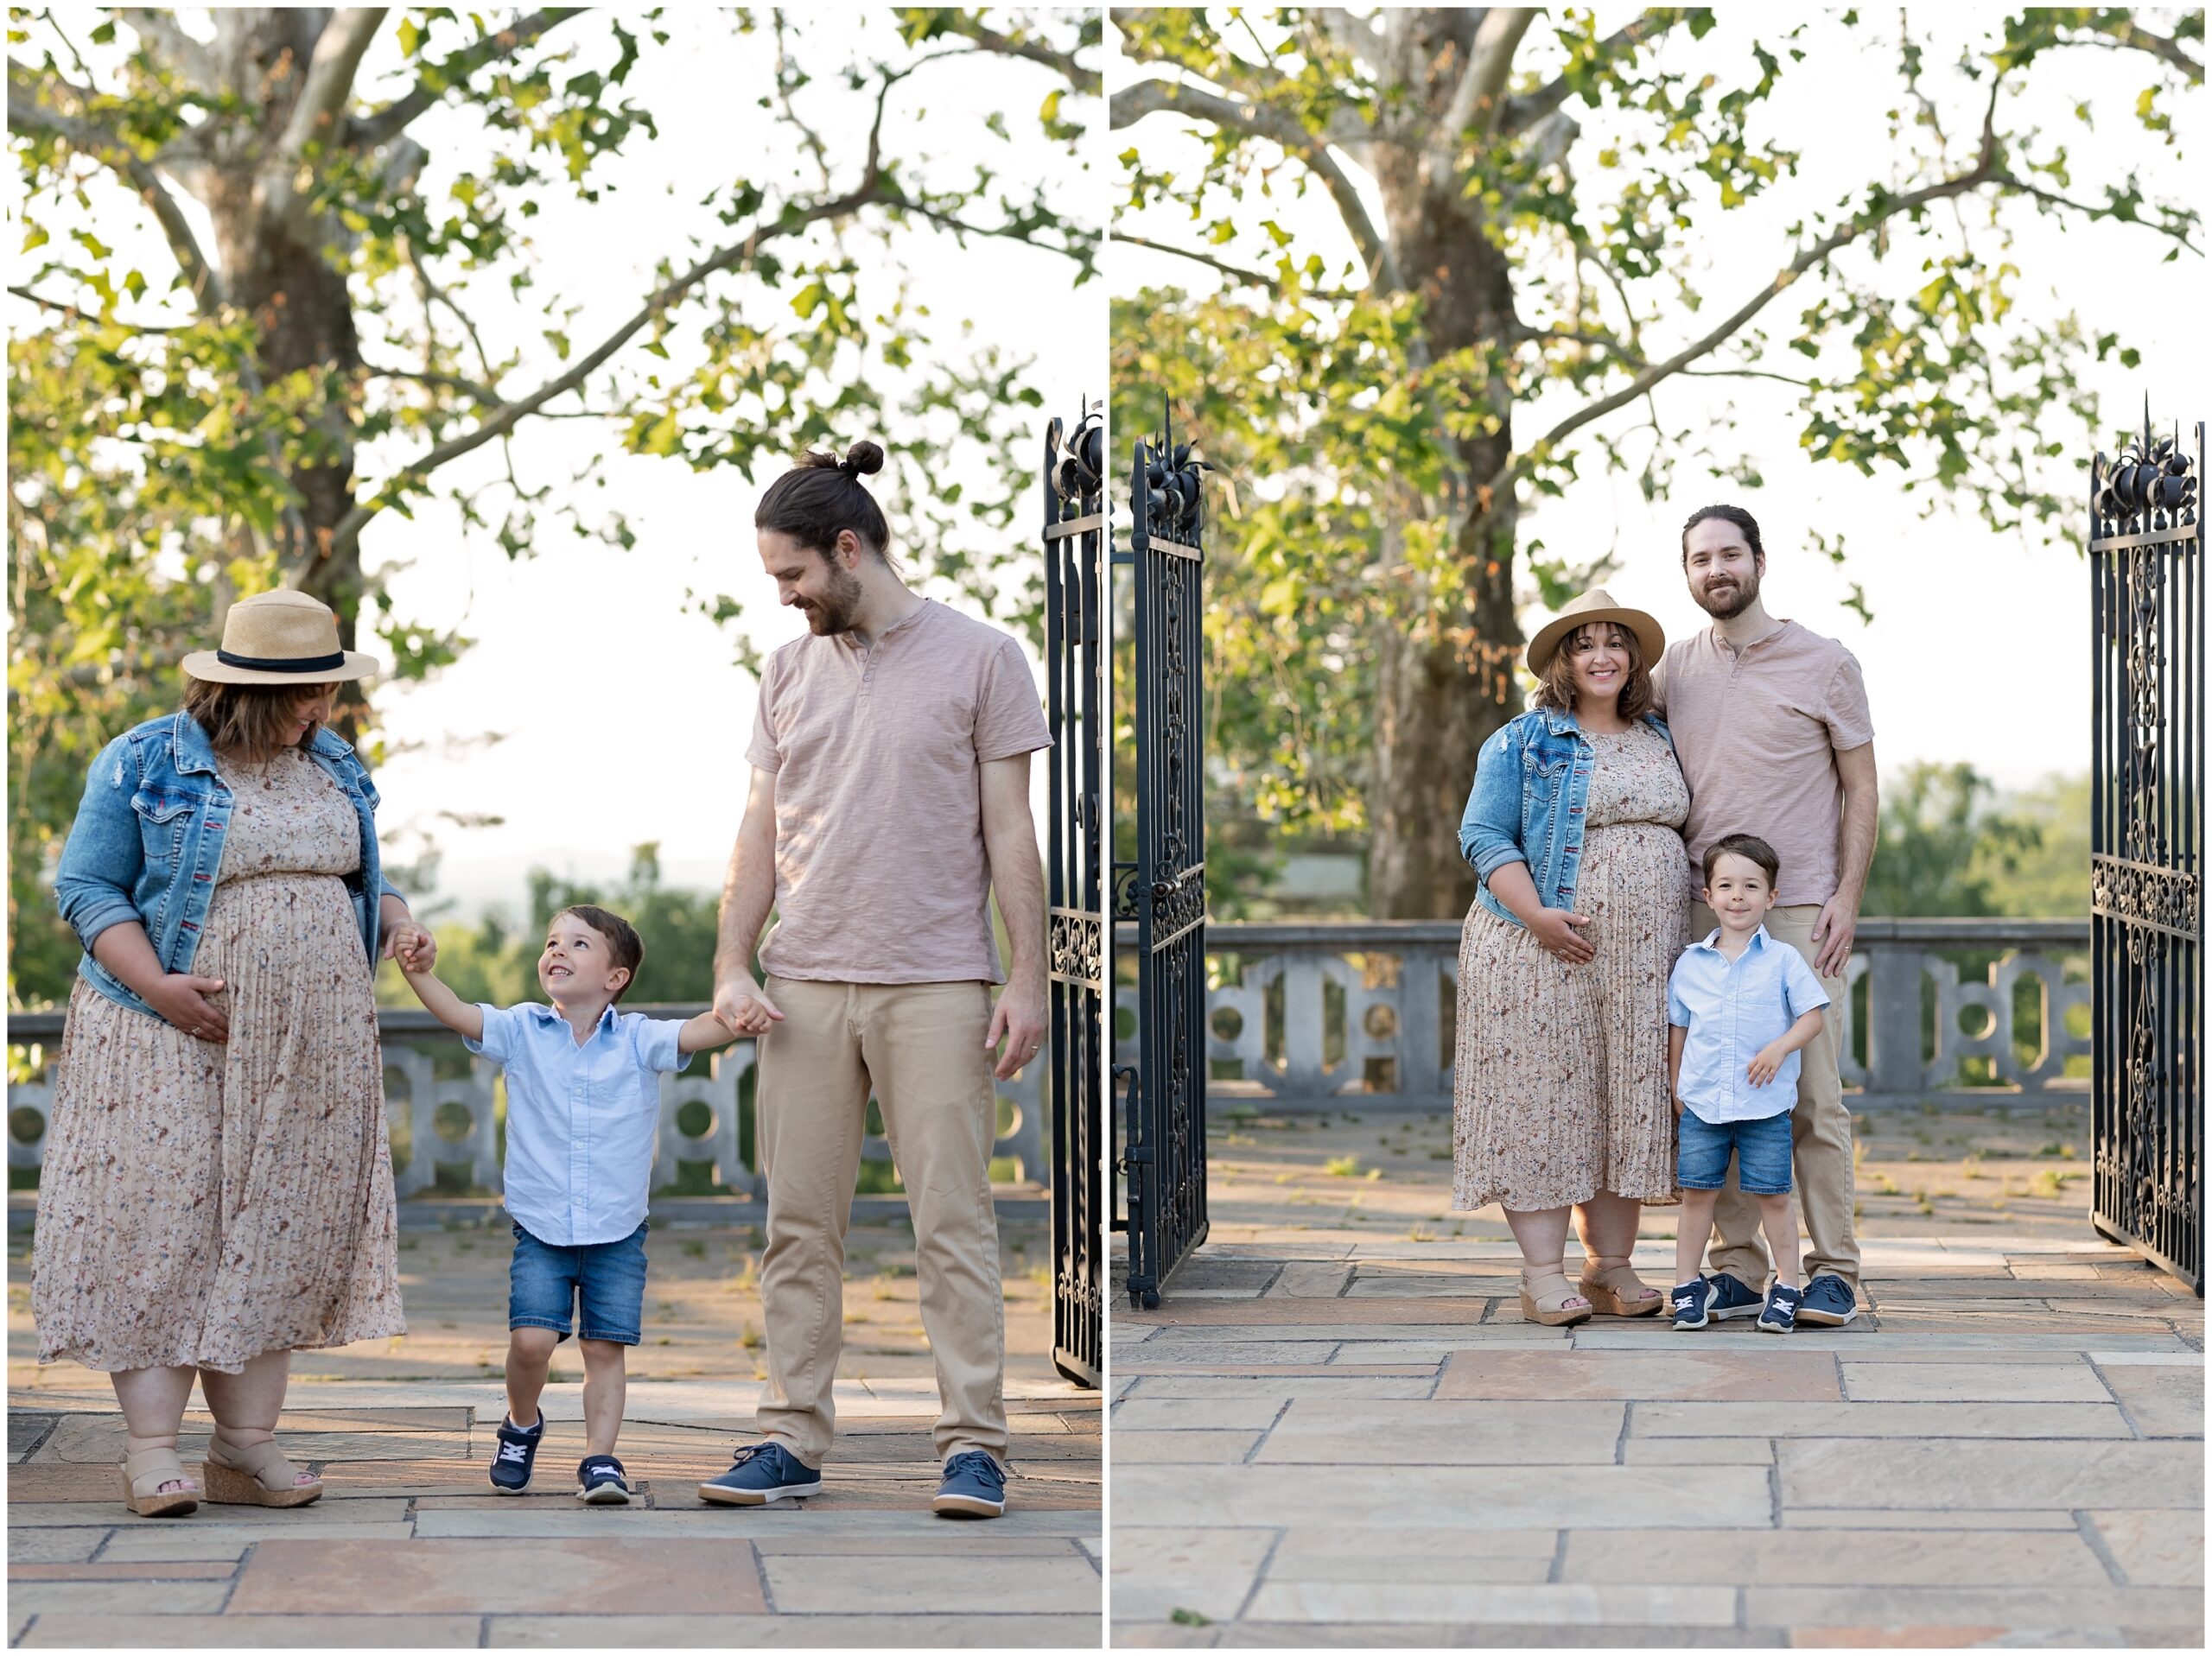 Mellon Park Family Maternity Session in Pittsburgh PA Photographed by Pittsburgh Maternity Photographer Acevedo Weddings